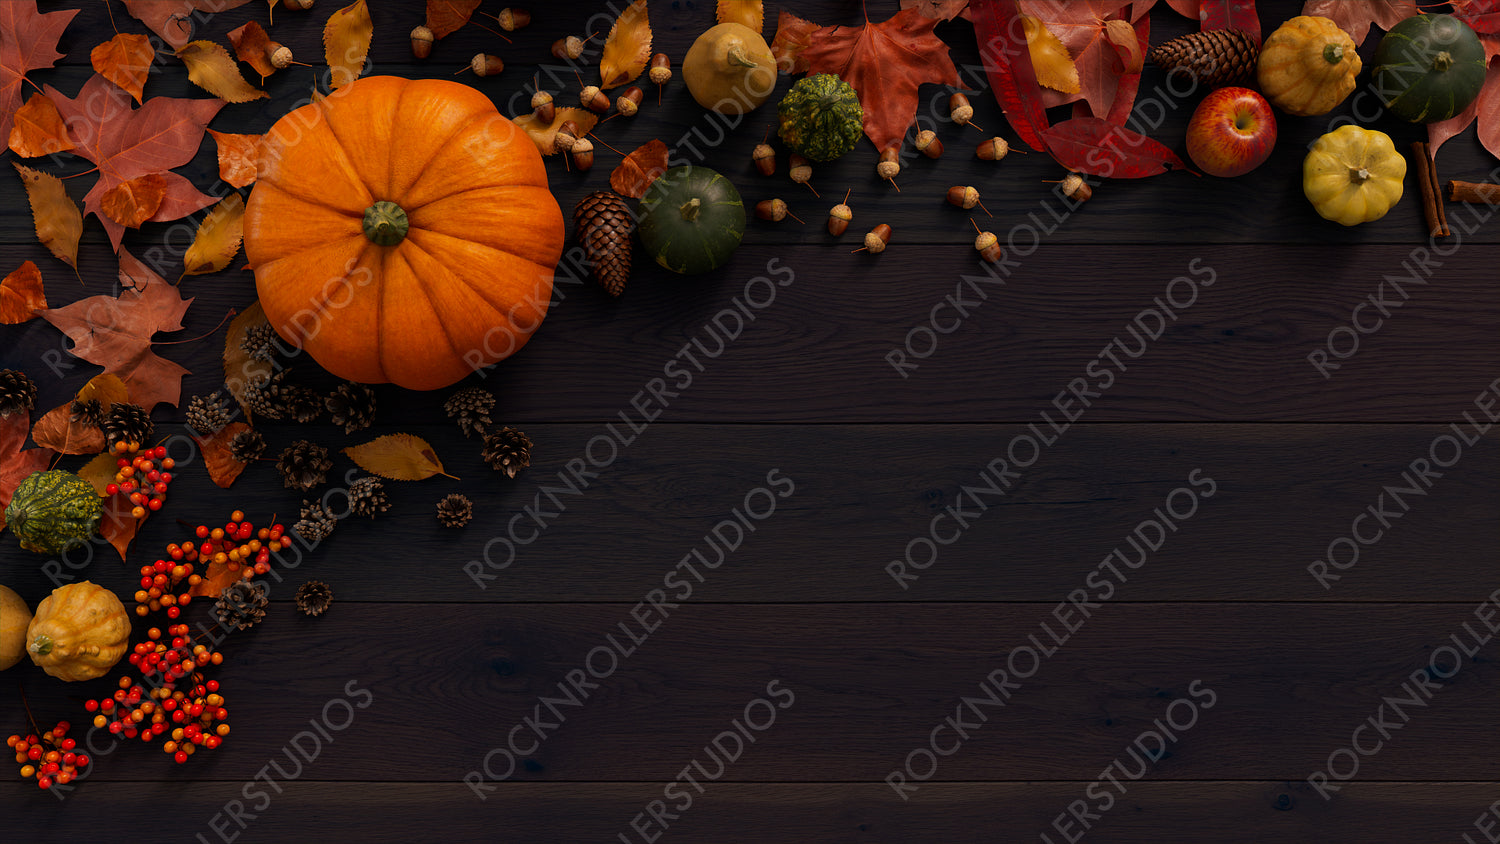 Dark wood Tabletop with fall themed border.